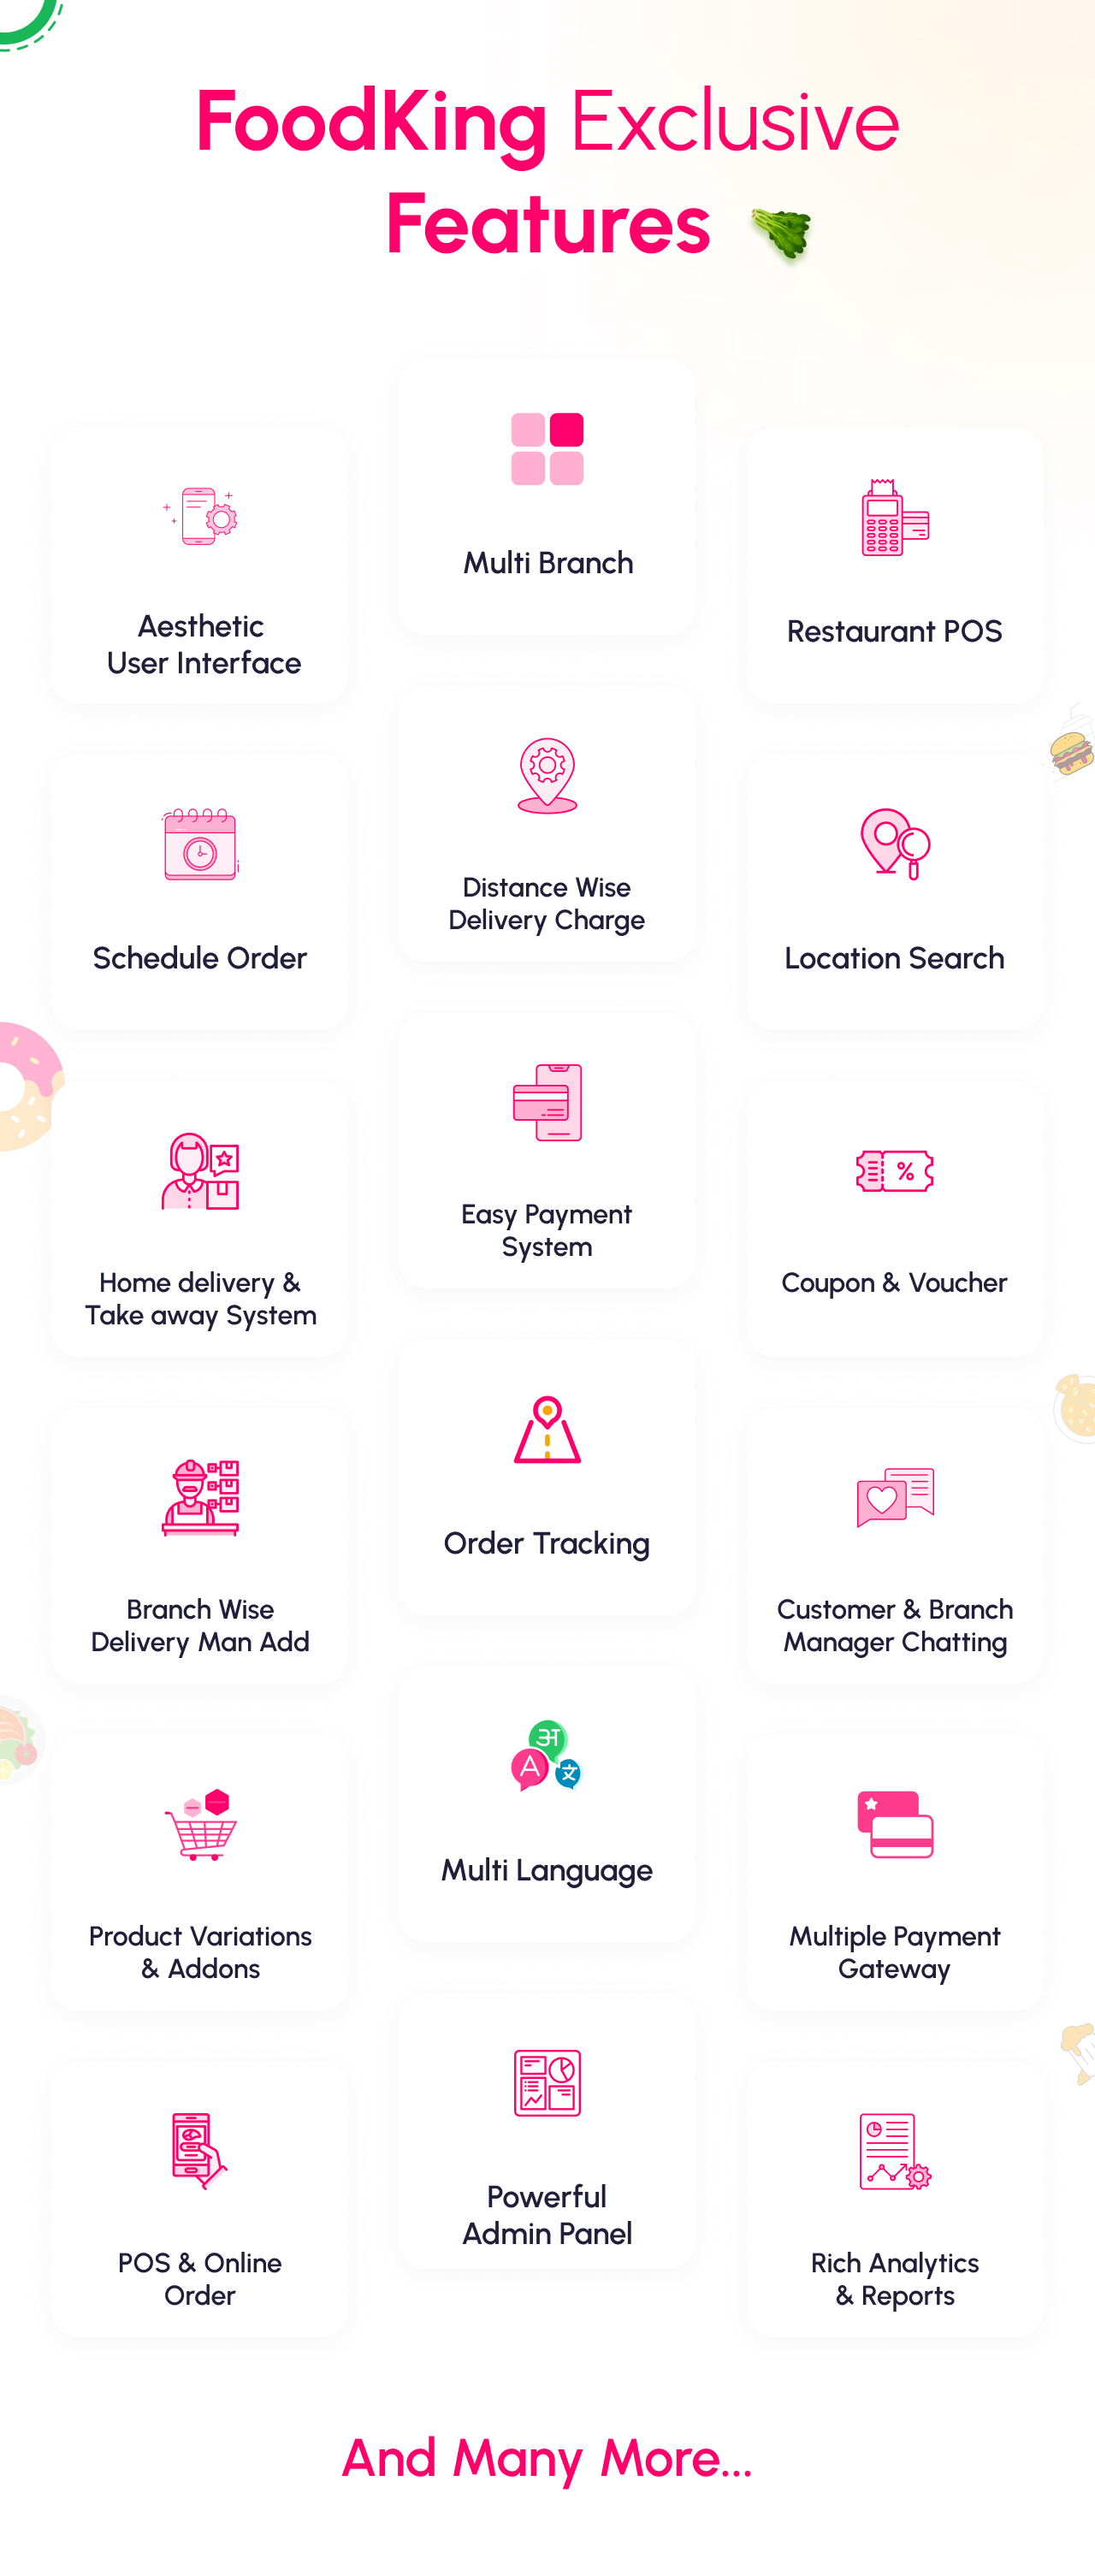 Foodking features are multi-branch, Pos, Distance wise delivery charge, location search, schedule order, aesthetic user interface, home delivery, and takeaway, coupon, and voucher, easy payment system, order tracking, chat, branch wise user manage, manage product variation and addons, multi-language, multiple payment gateways, advanced reporting system, spa, single page